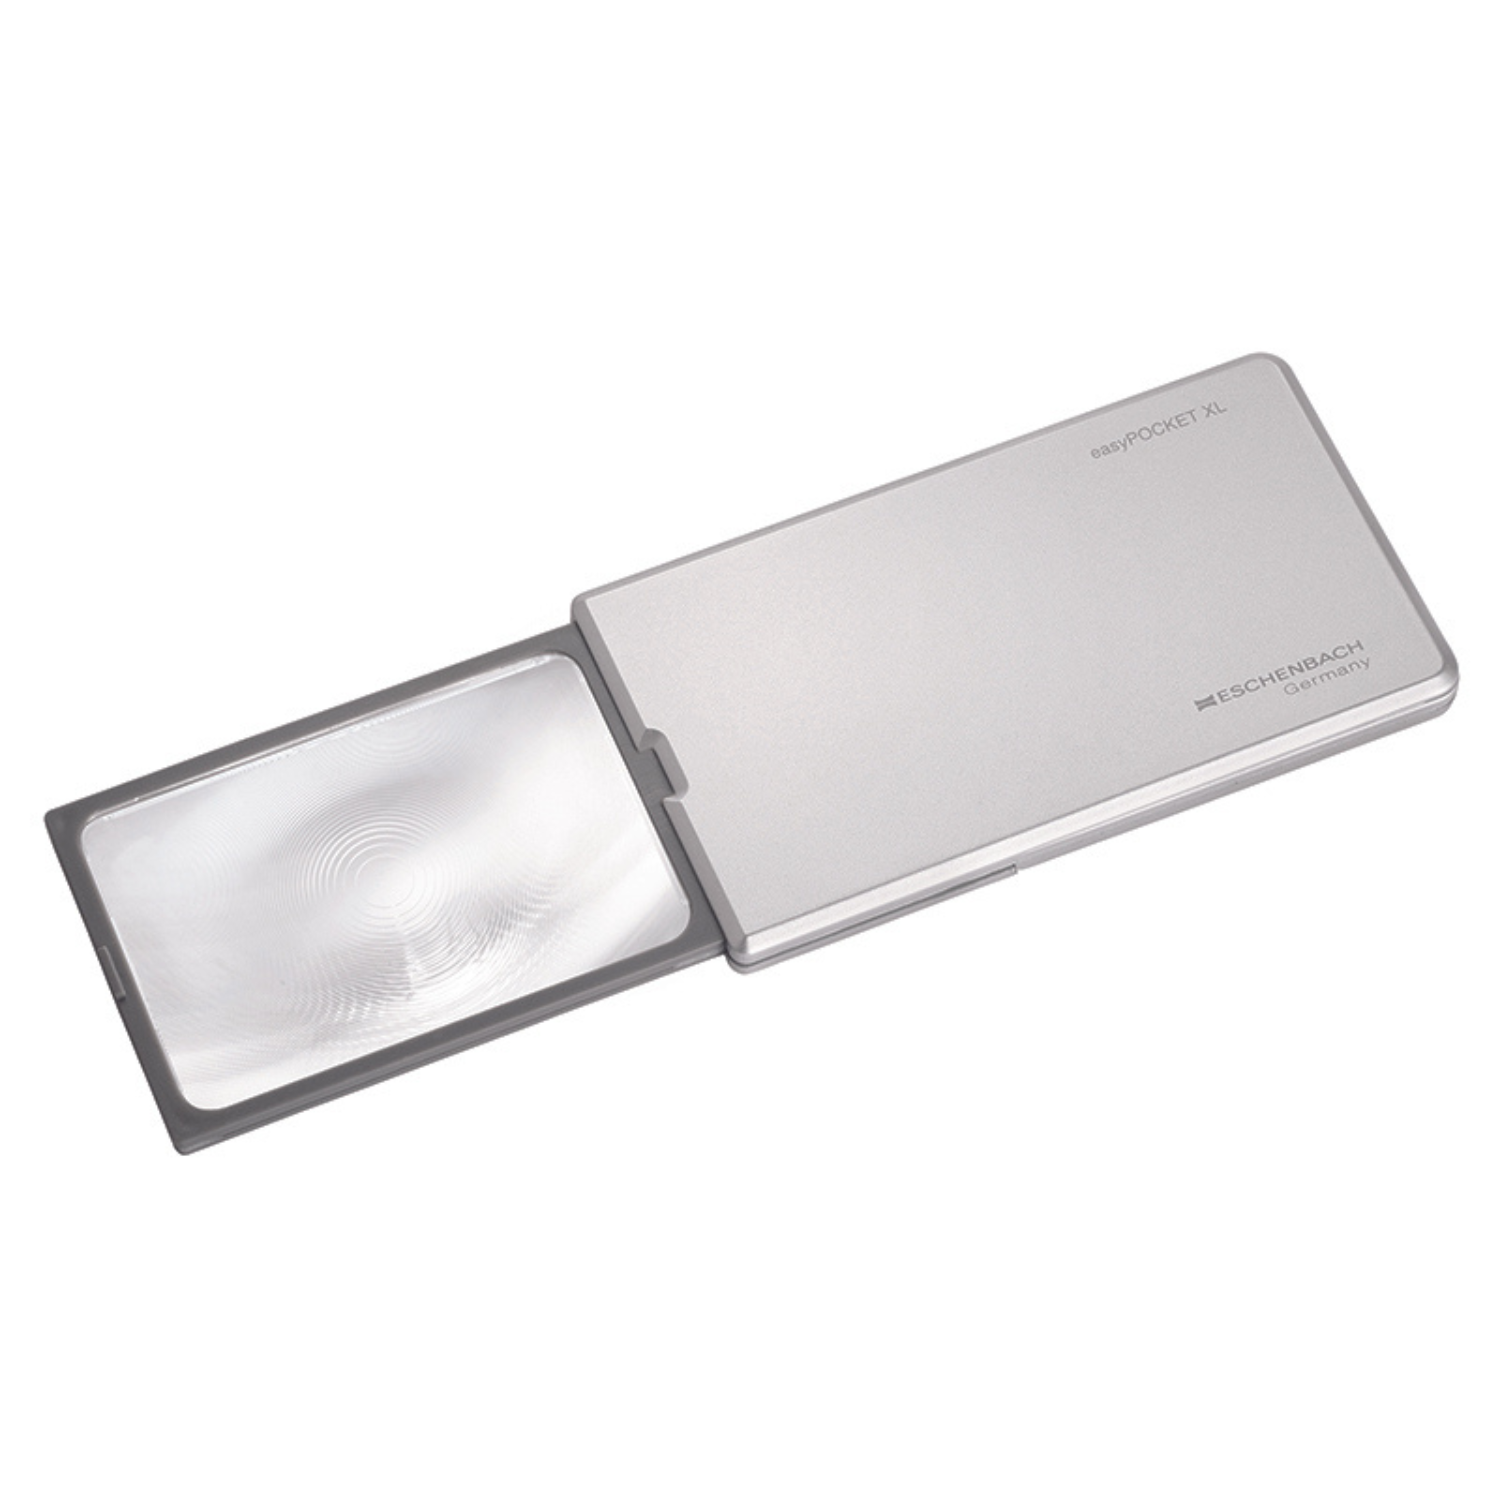 Image of silver EasyPOCKET XL 2.5x LED magnifier from Eschenbach Optik